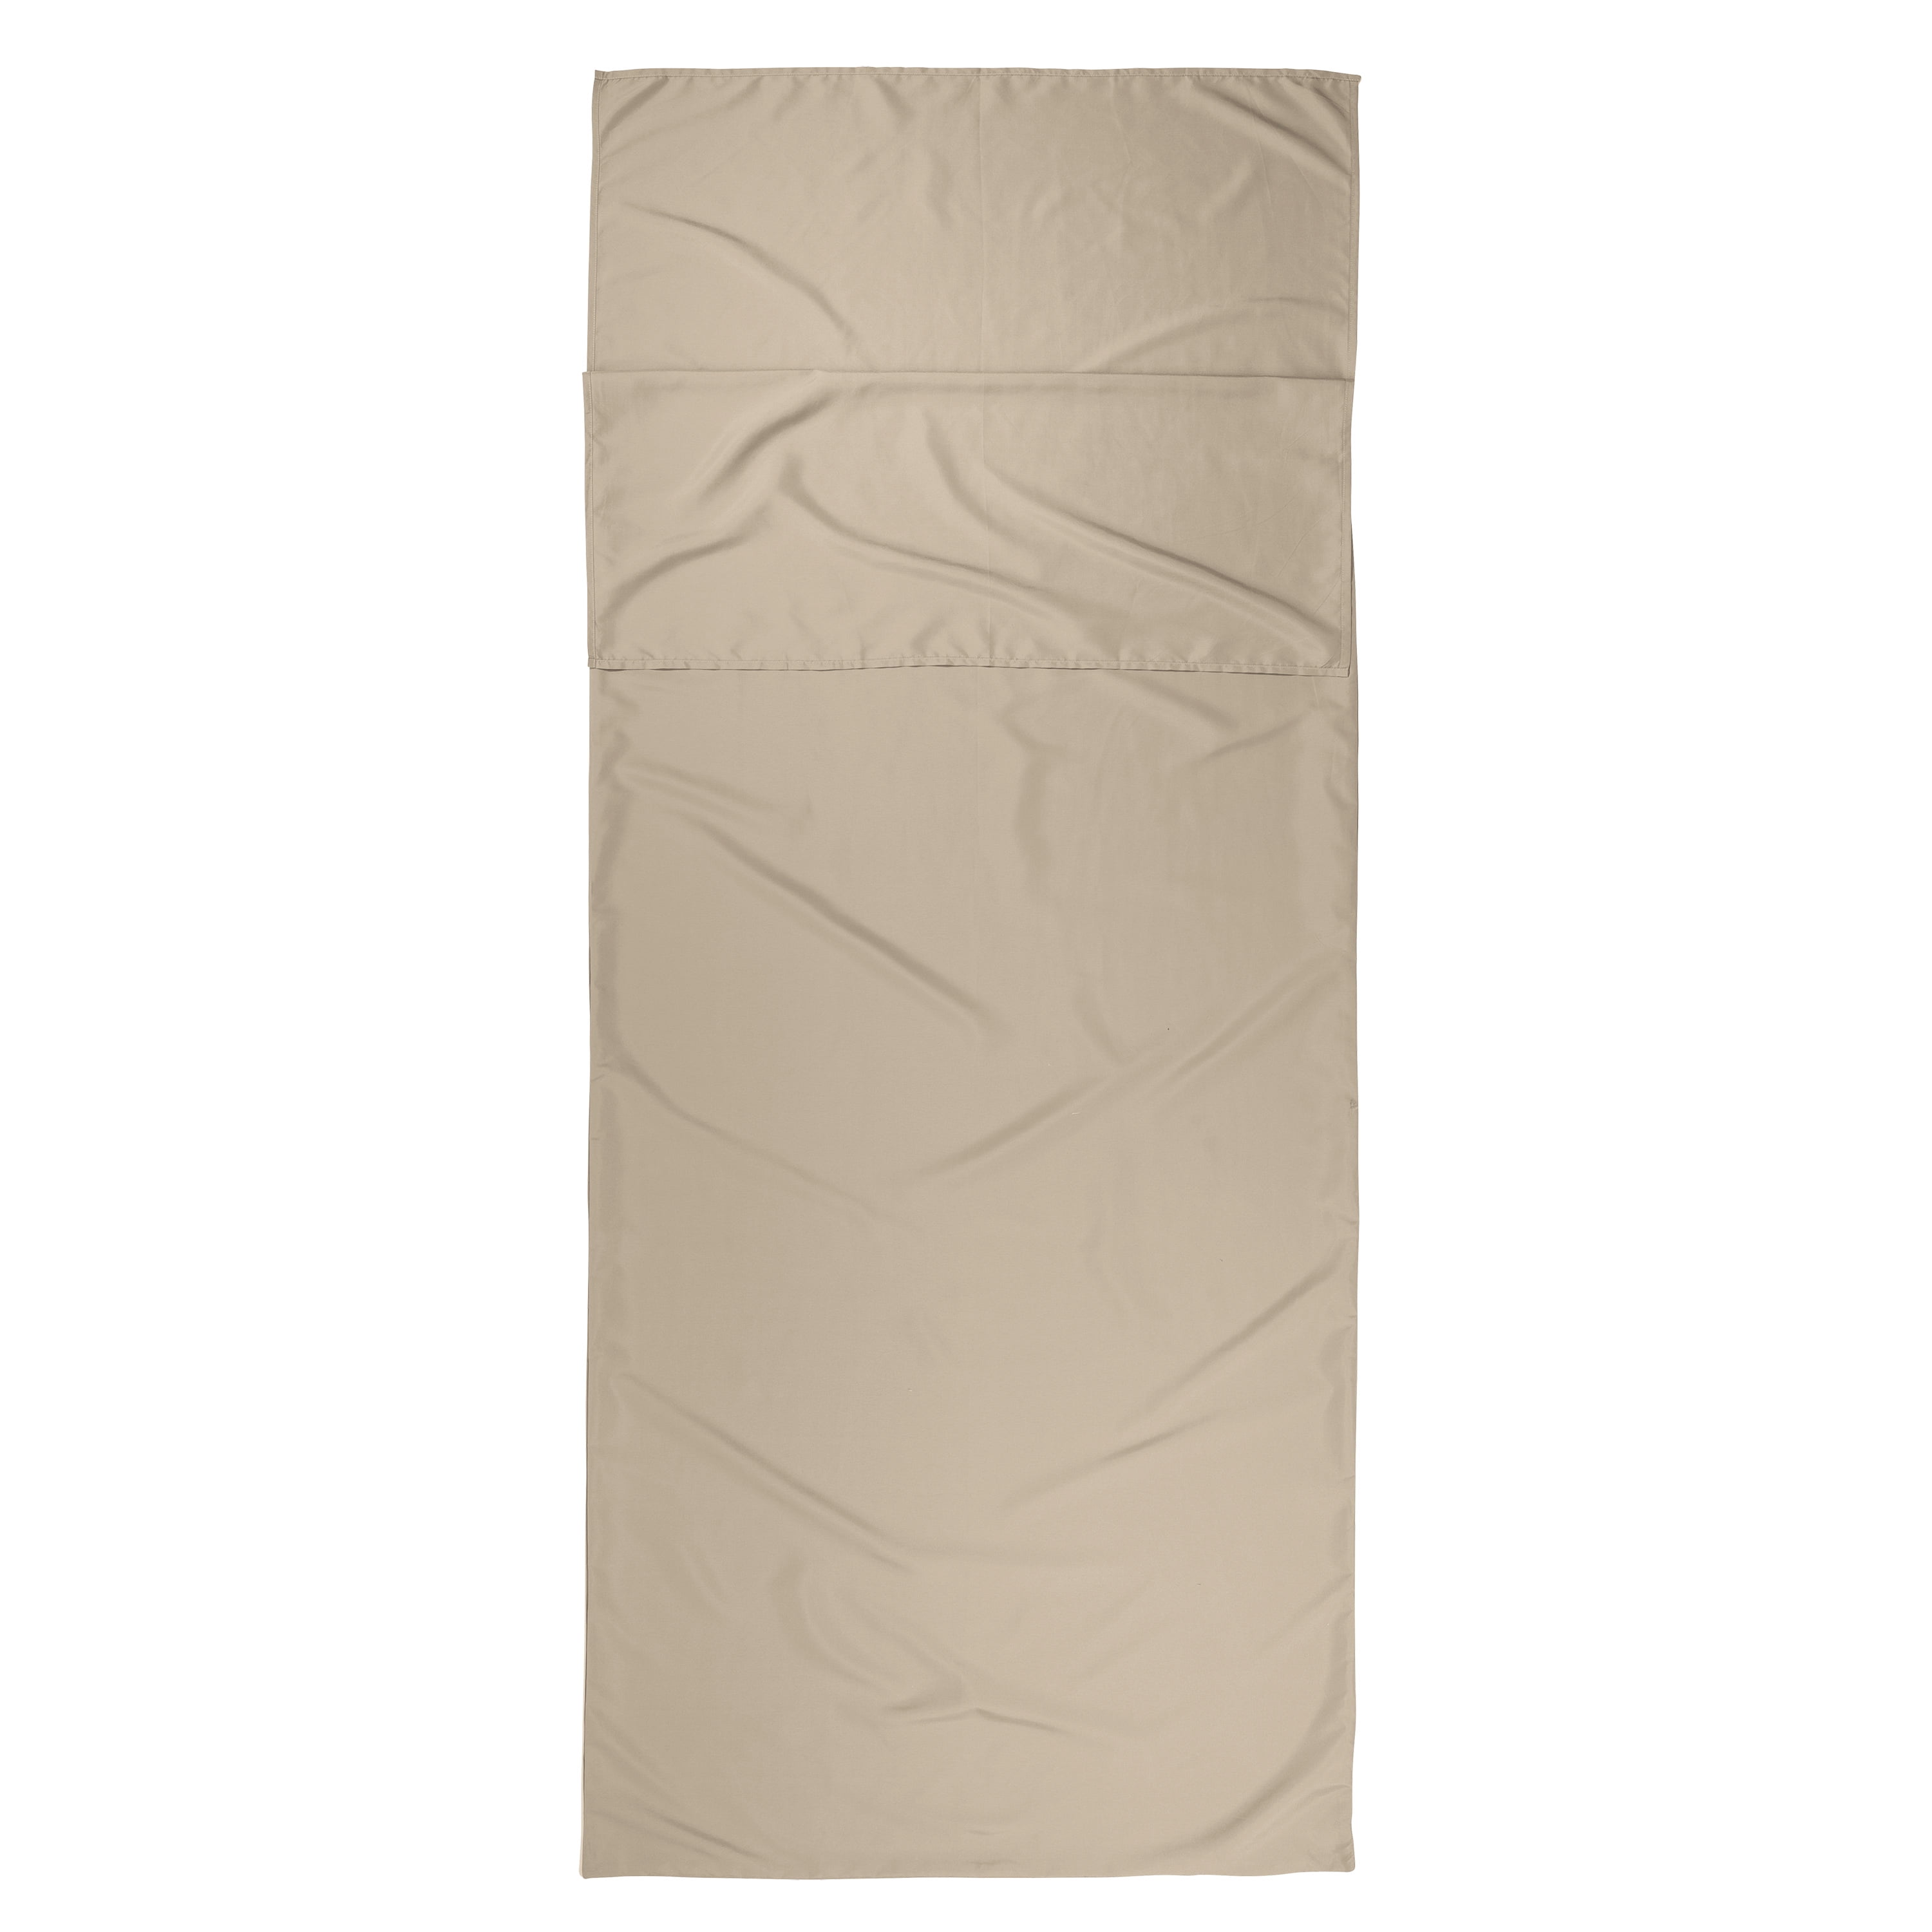 Ozark Trail Breathable Polyester Camping Sleeping Bag Liner Sheet, Beige (78" L x 33.5" W)